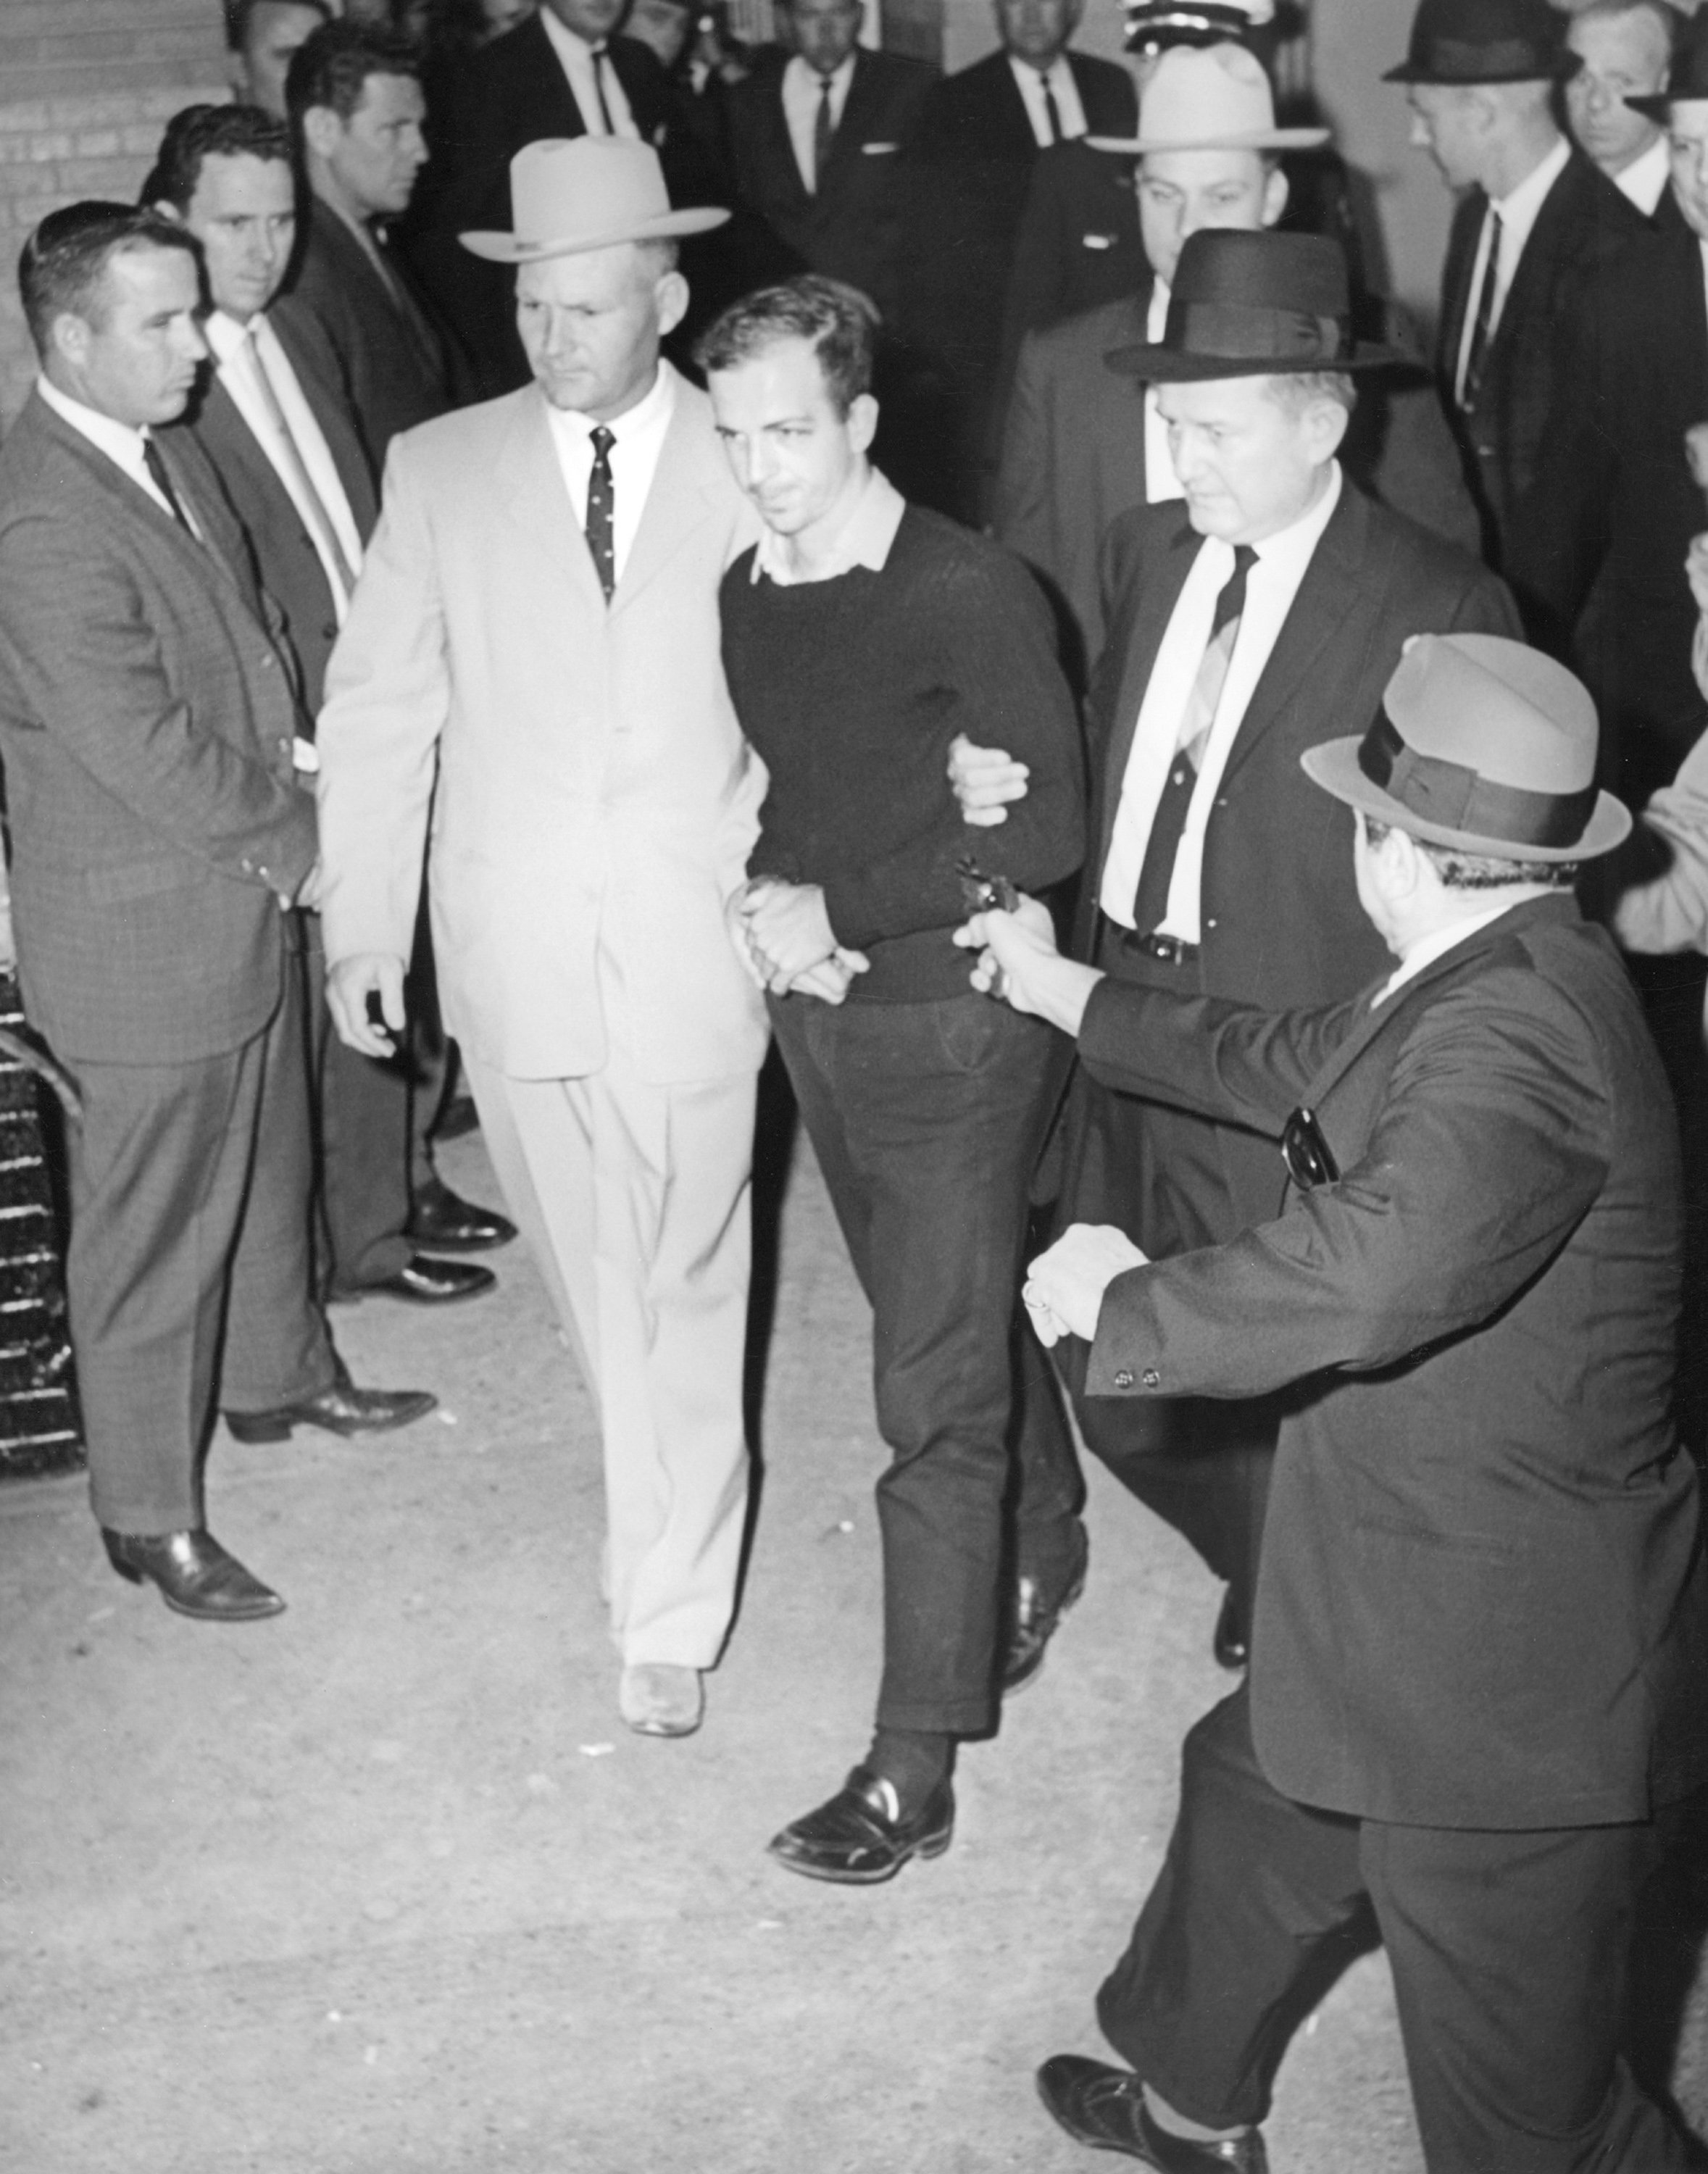 Lee_Harvey_Oswald_being_shot_by_Jack_Ruby_as_Oswald_is_being_moved_by_police,_1963.jpg